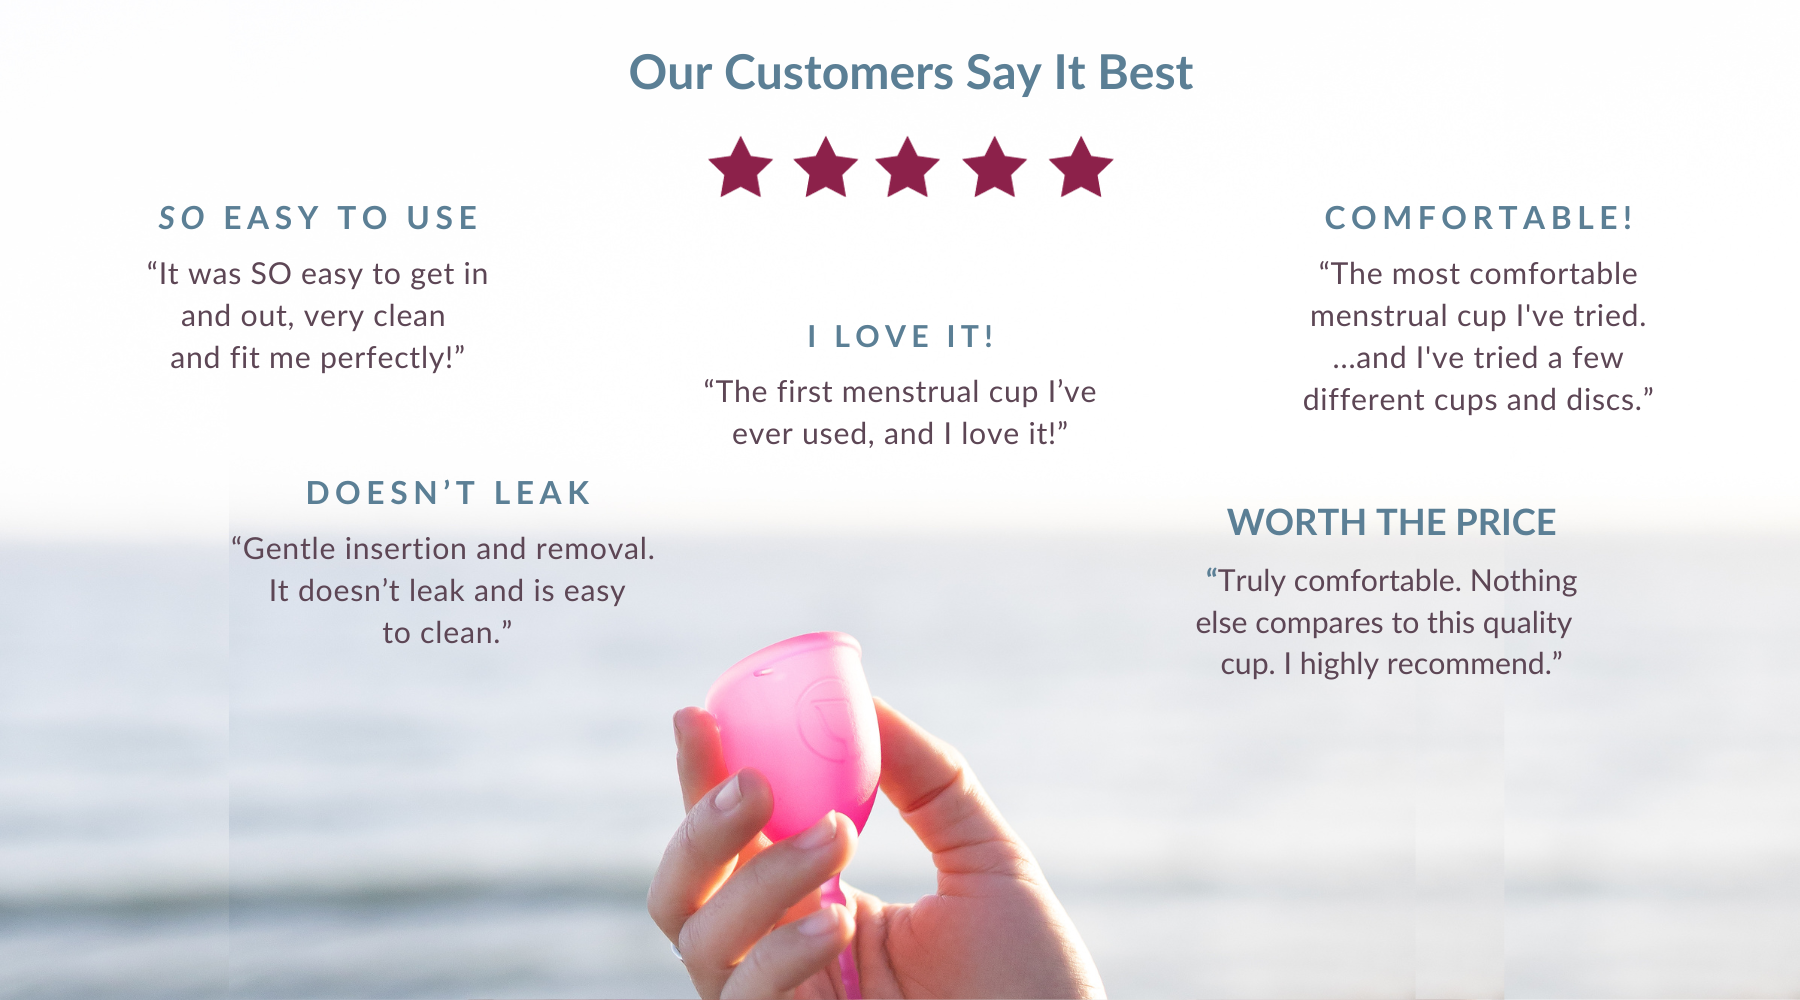 Our Customers Say it Best: So easy to use! Doesn't Leak. Comfortable. Worth the Price. Menstrual Cup Period Cup Kind Cup Customer Review